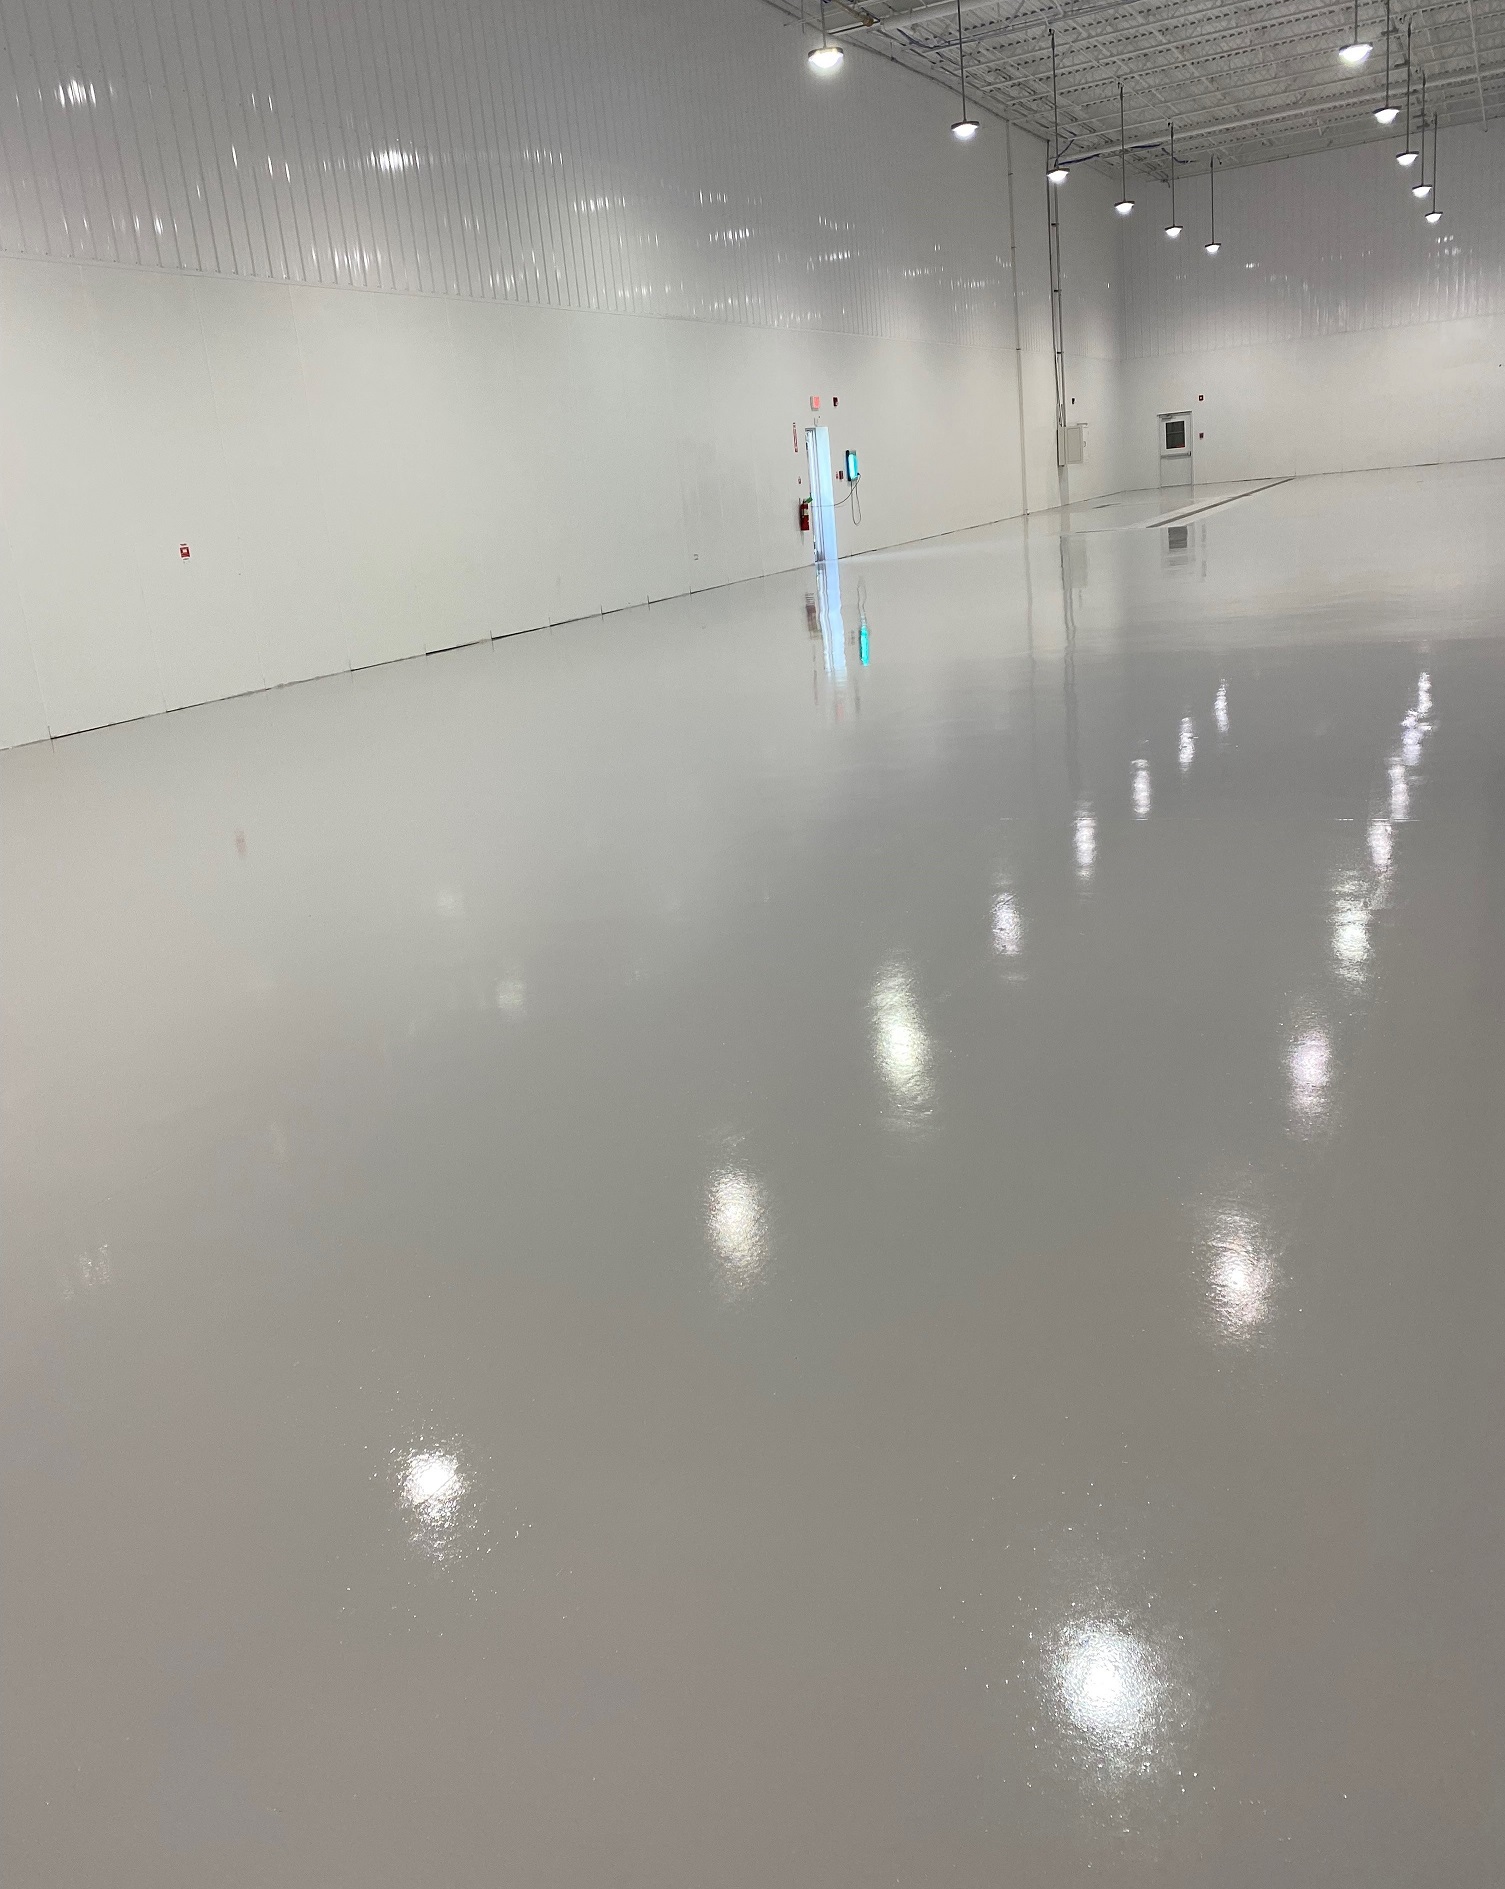 Urethane mortar, epoxy coating systems, floor moisture mitigation, manufacturing floor coatings, non-skid safety flooring, industrial safety, Industrial Applications Inc., TeamIA, flooring contractor Russellville AR, Russellville AR